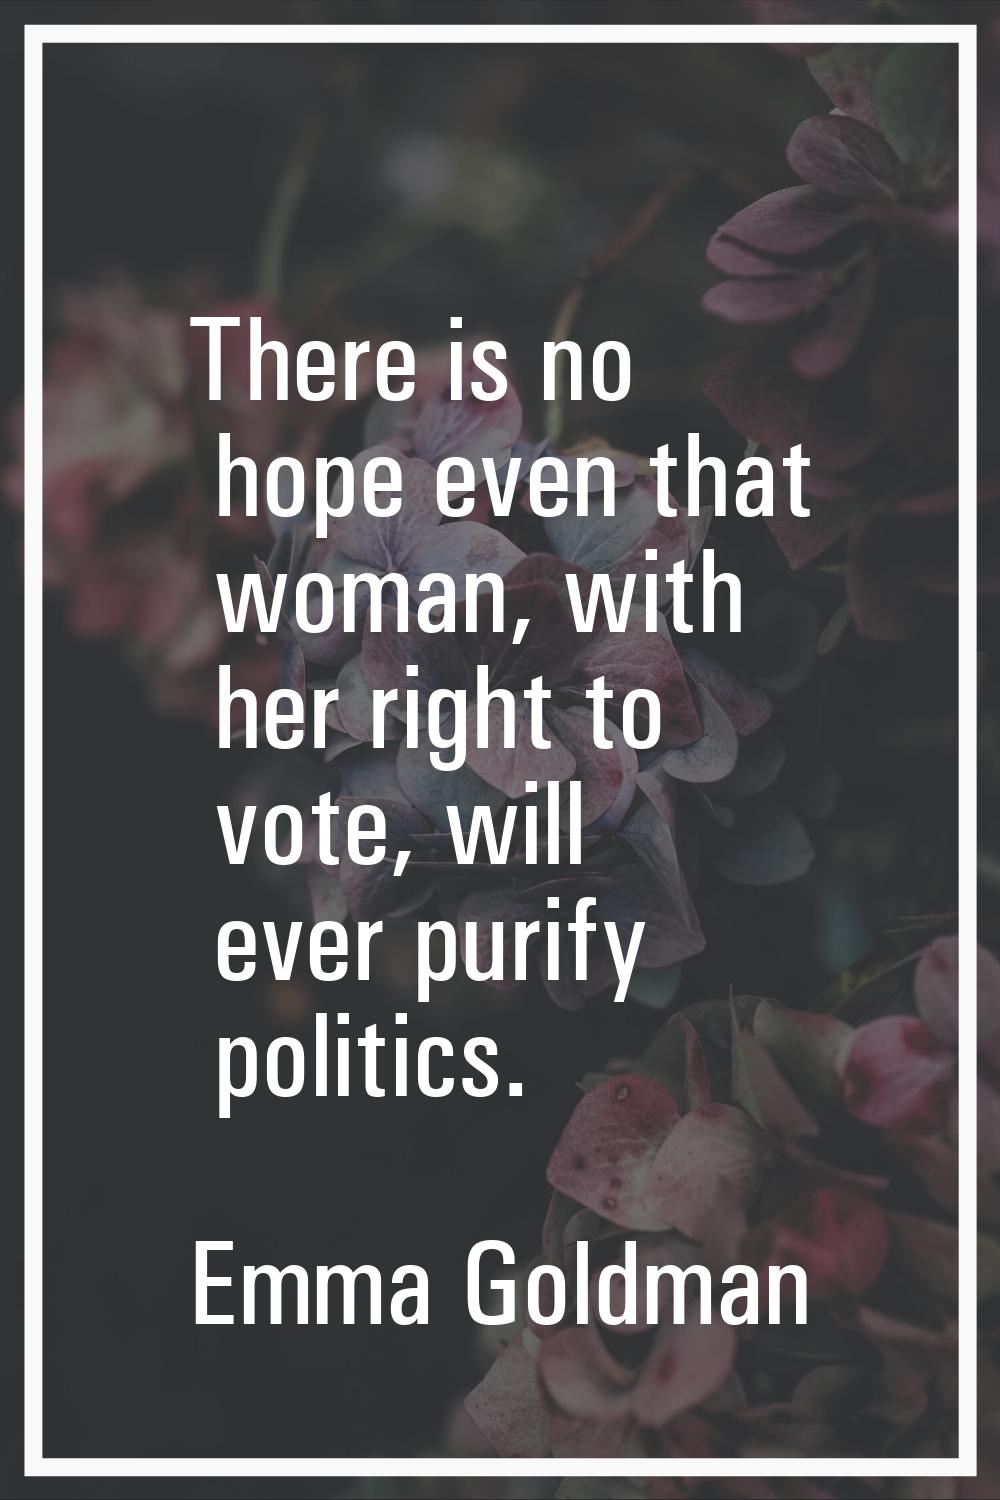 There is no hope even that woman, with her right to vote, will ever purify politics.